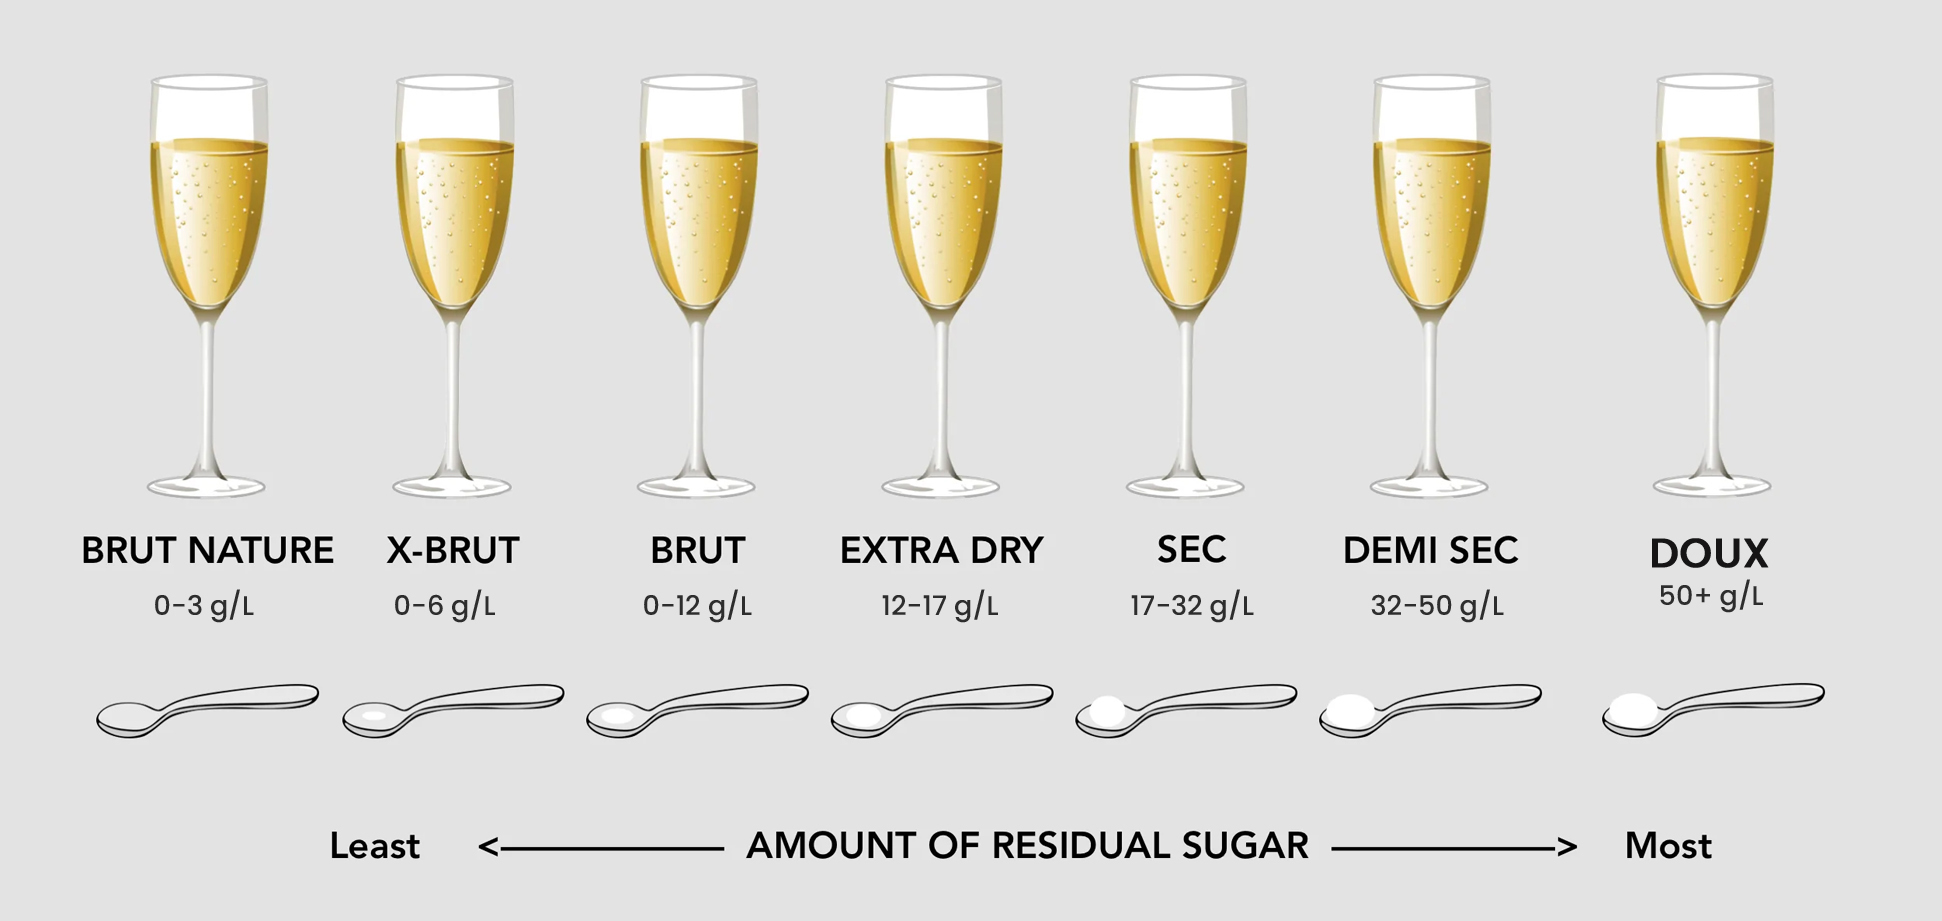 calories in champagne bottle as per dosage